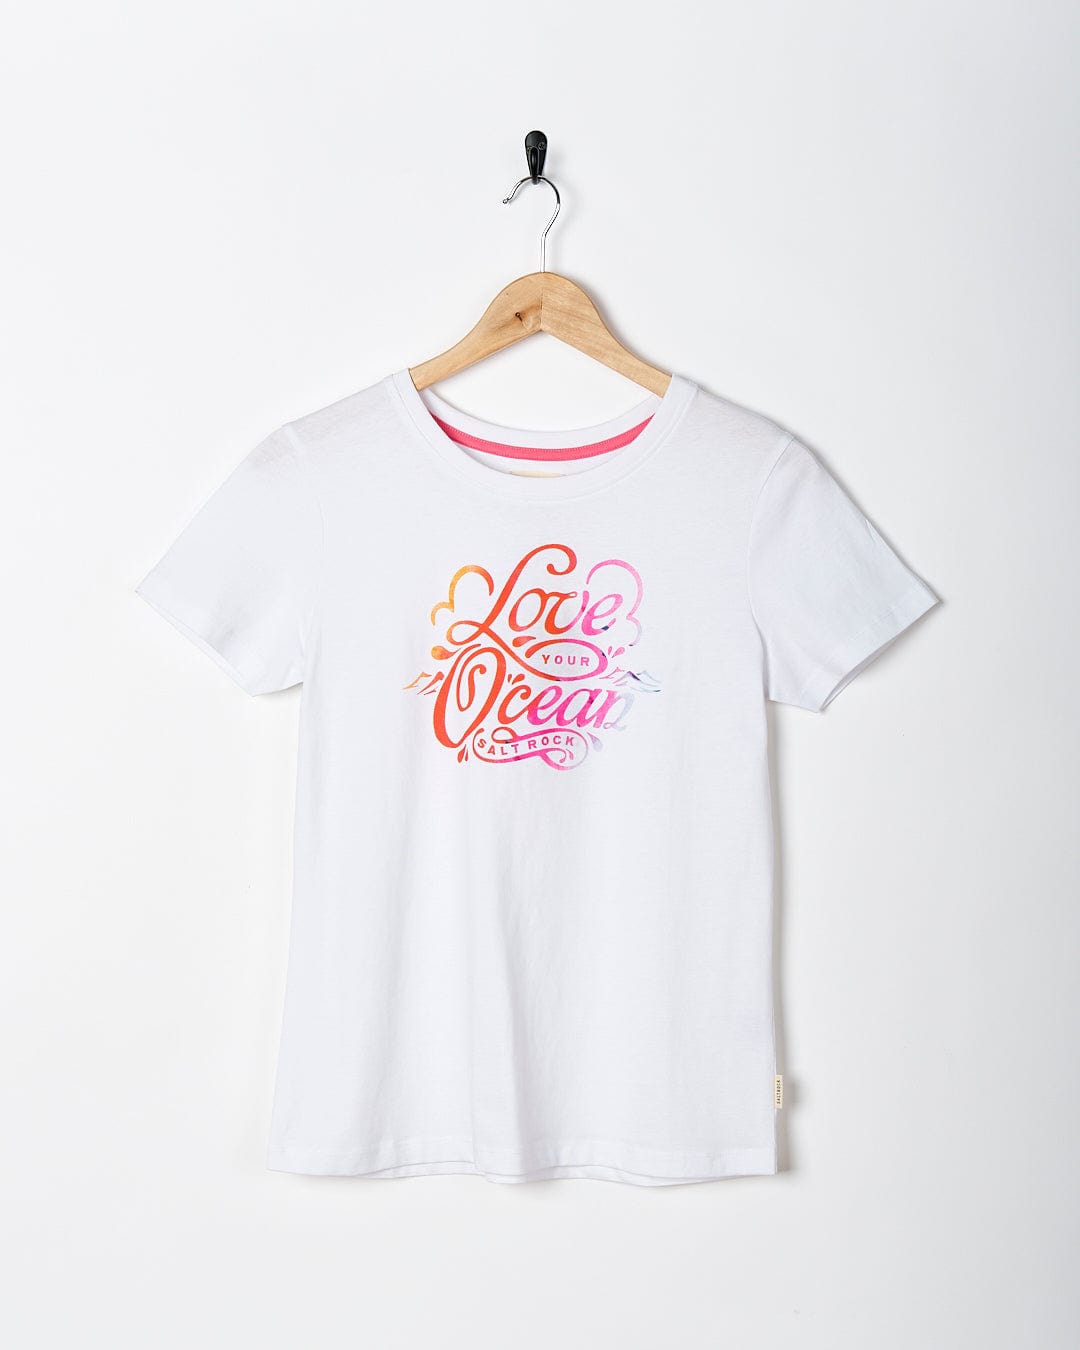 A Love Your Ocean - Womens Short Sleeve T-Shirt - White with a colorful logo on it by Saltrock.